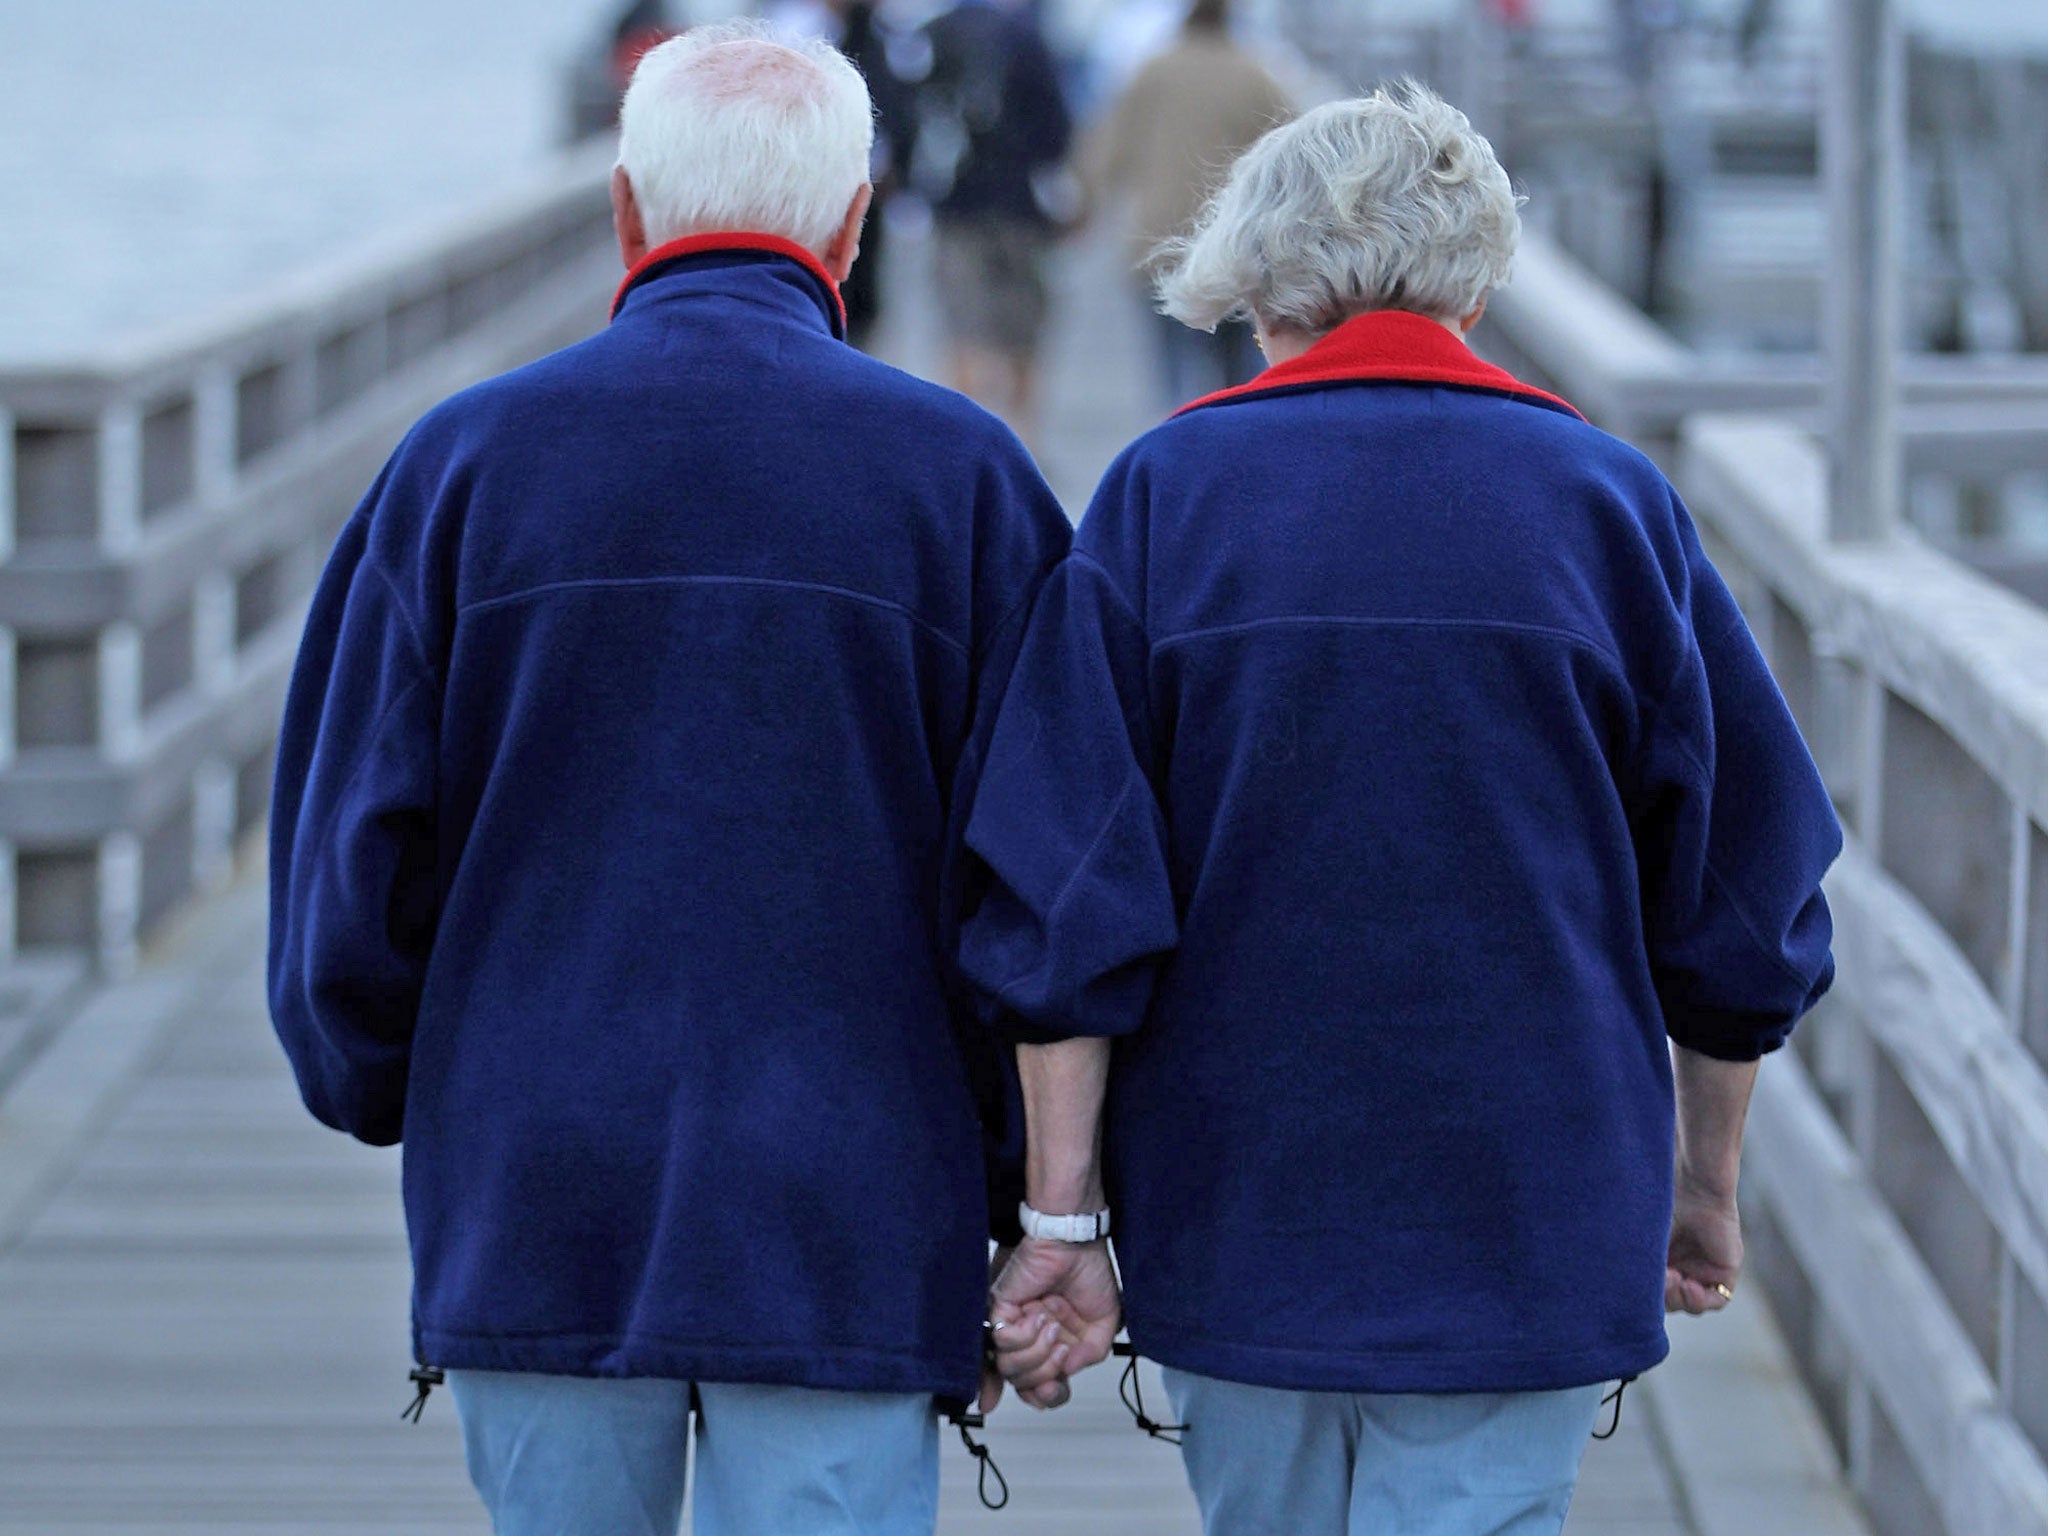 Britons are enjoying a thriving sex-life well into their sixties, a survey has shown